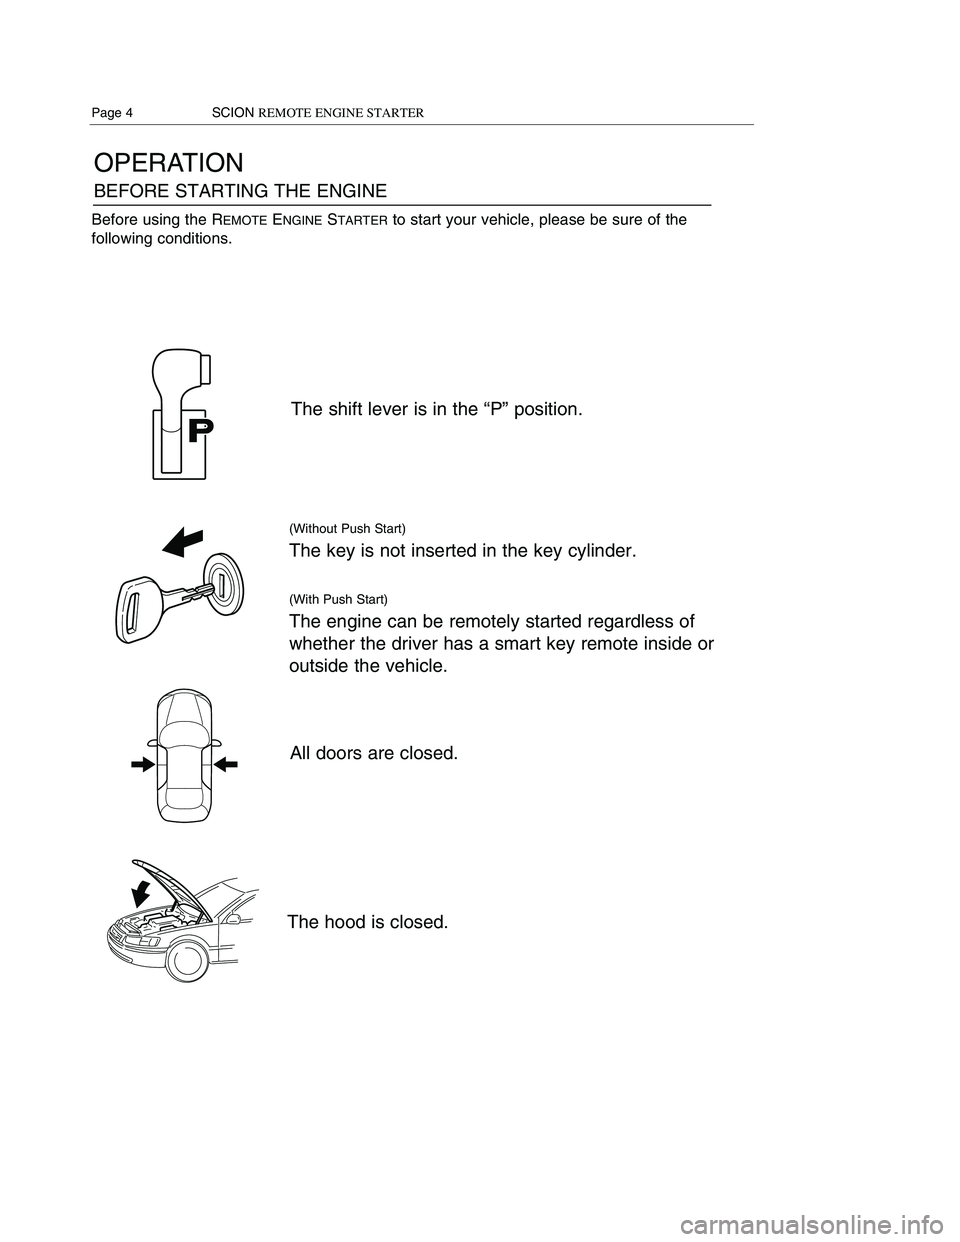 TOYOTA xD 2012  Accessories, Audio & Navigation (in English) 
OPERATION
BEFORE STARTING THE ENGINE
The shift lever is in the “P” position.
(Without Push Start)
The key is not inserted in the key cylinder.
(With Push Start)
The engine can be remotely started